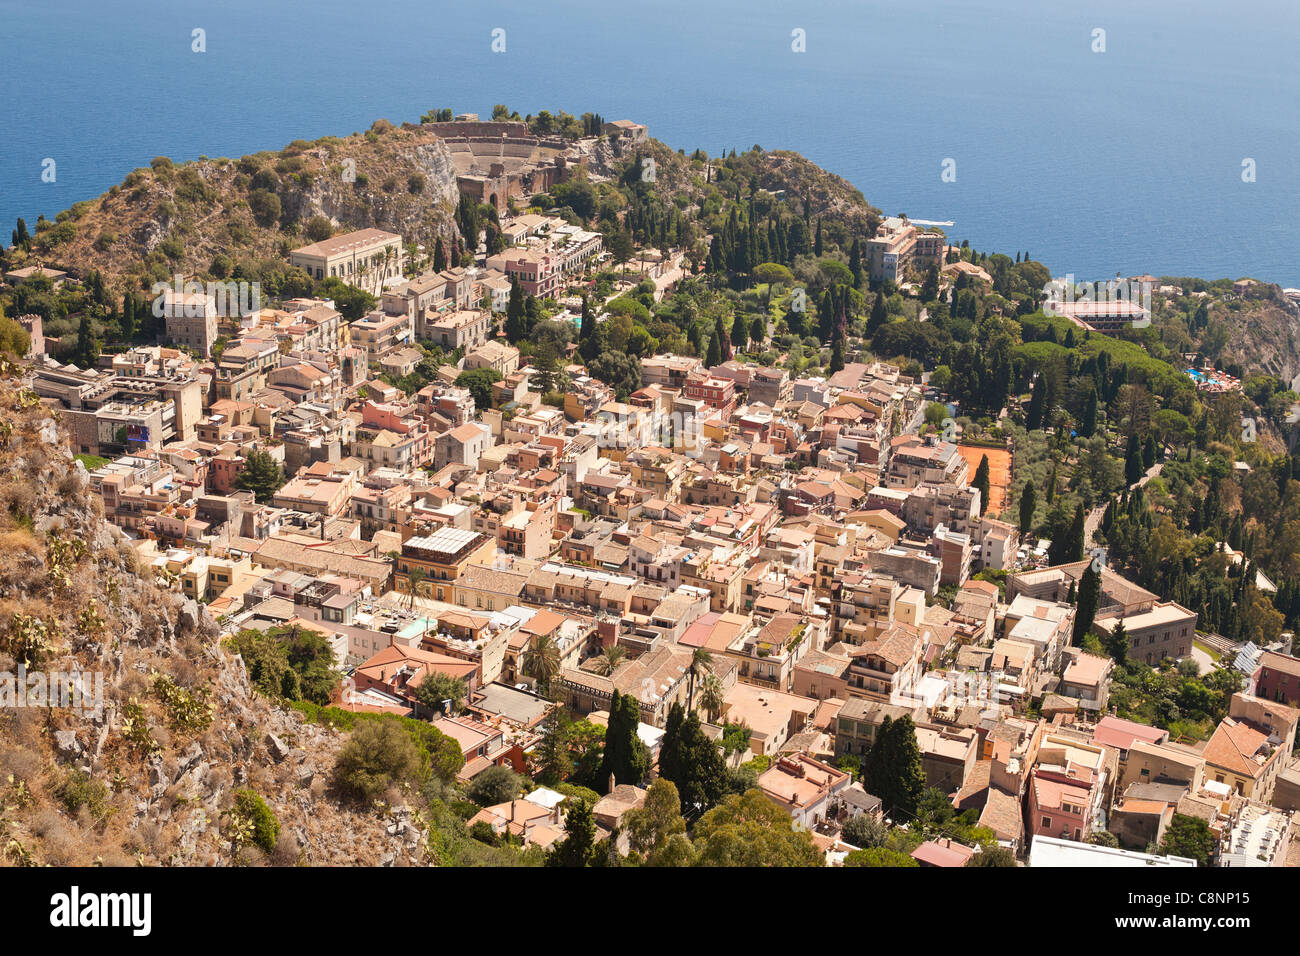 View of the town of Taormina, and Greek Theatre, Sicily, Italy Stock Photo